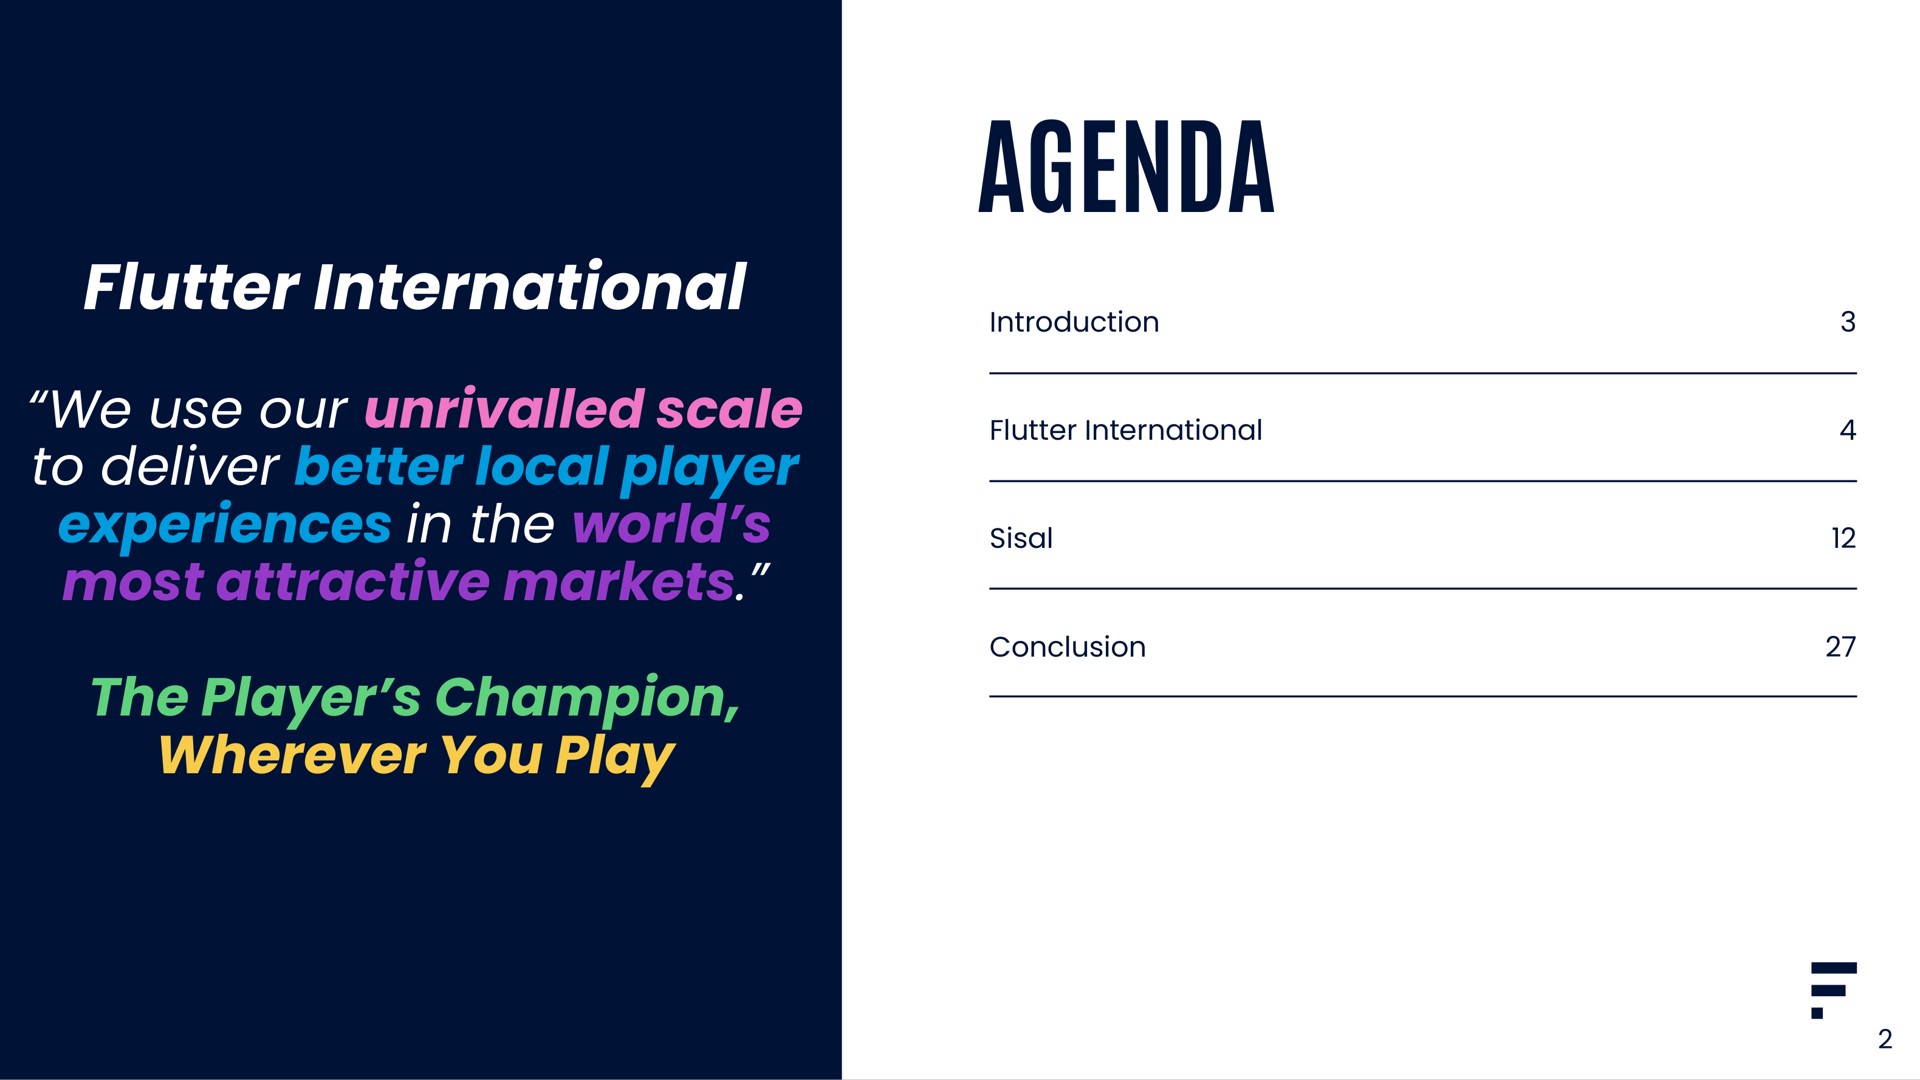 flutter international we use our scale to deliver better local player experiences in the world most attractive markets the player champion wherever you play agenda | Flutter